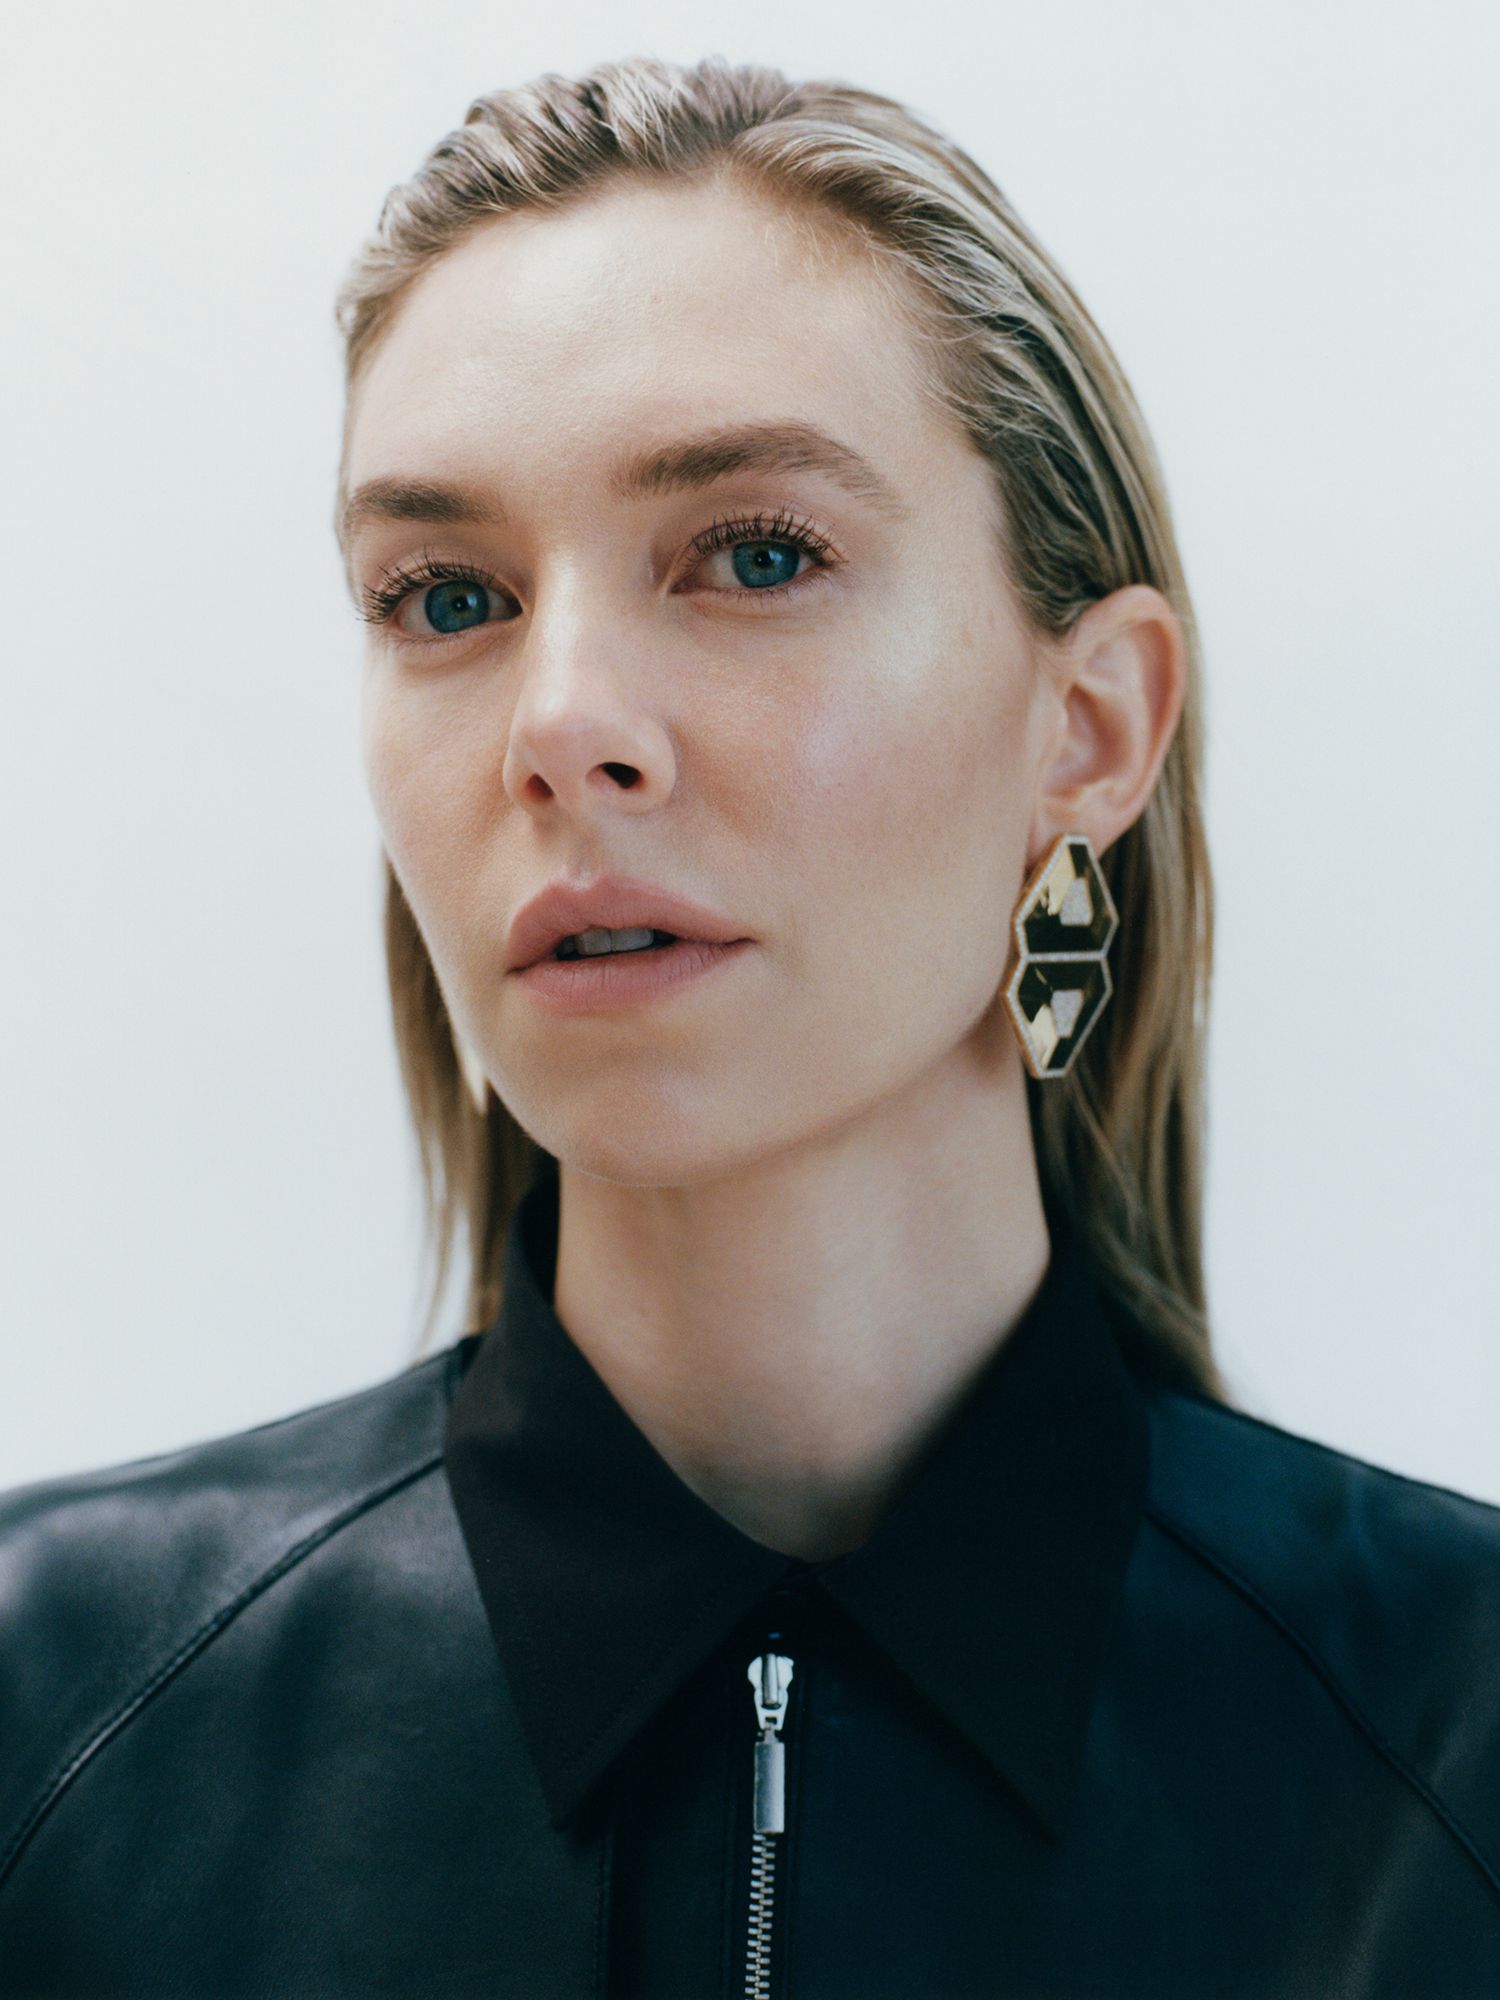 Center Stage: Vanessa Kirby by Toby Coulson for Porter Magazine April 2021. Clothing & Accessories: Leather coat, Toteme; shirt, Bottega Veneta; earrings, Ofira